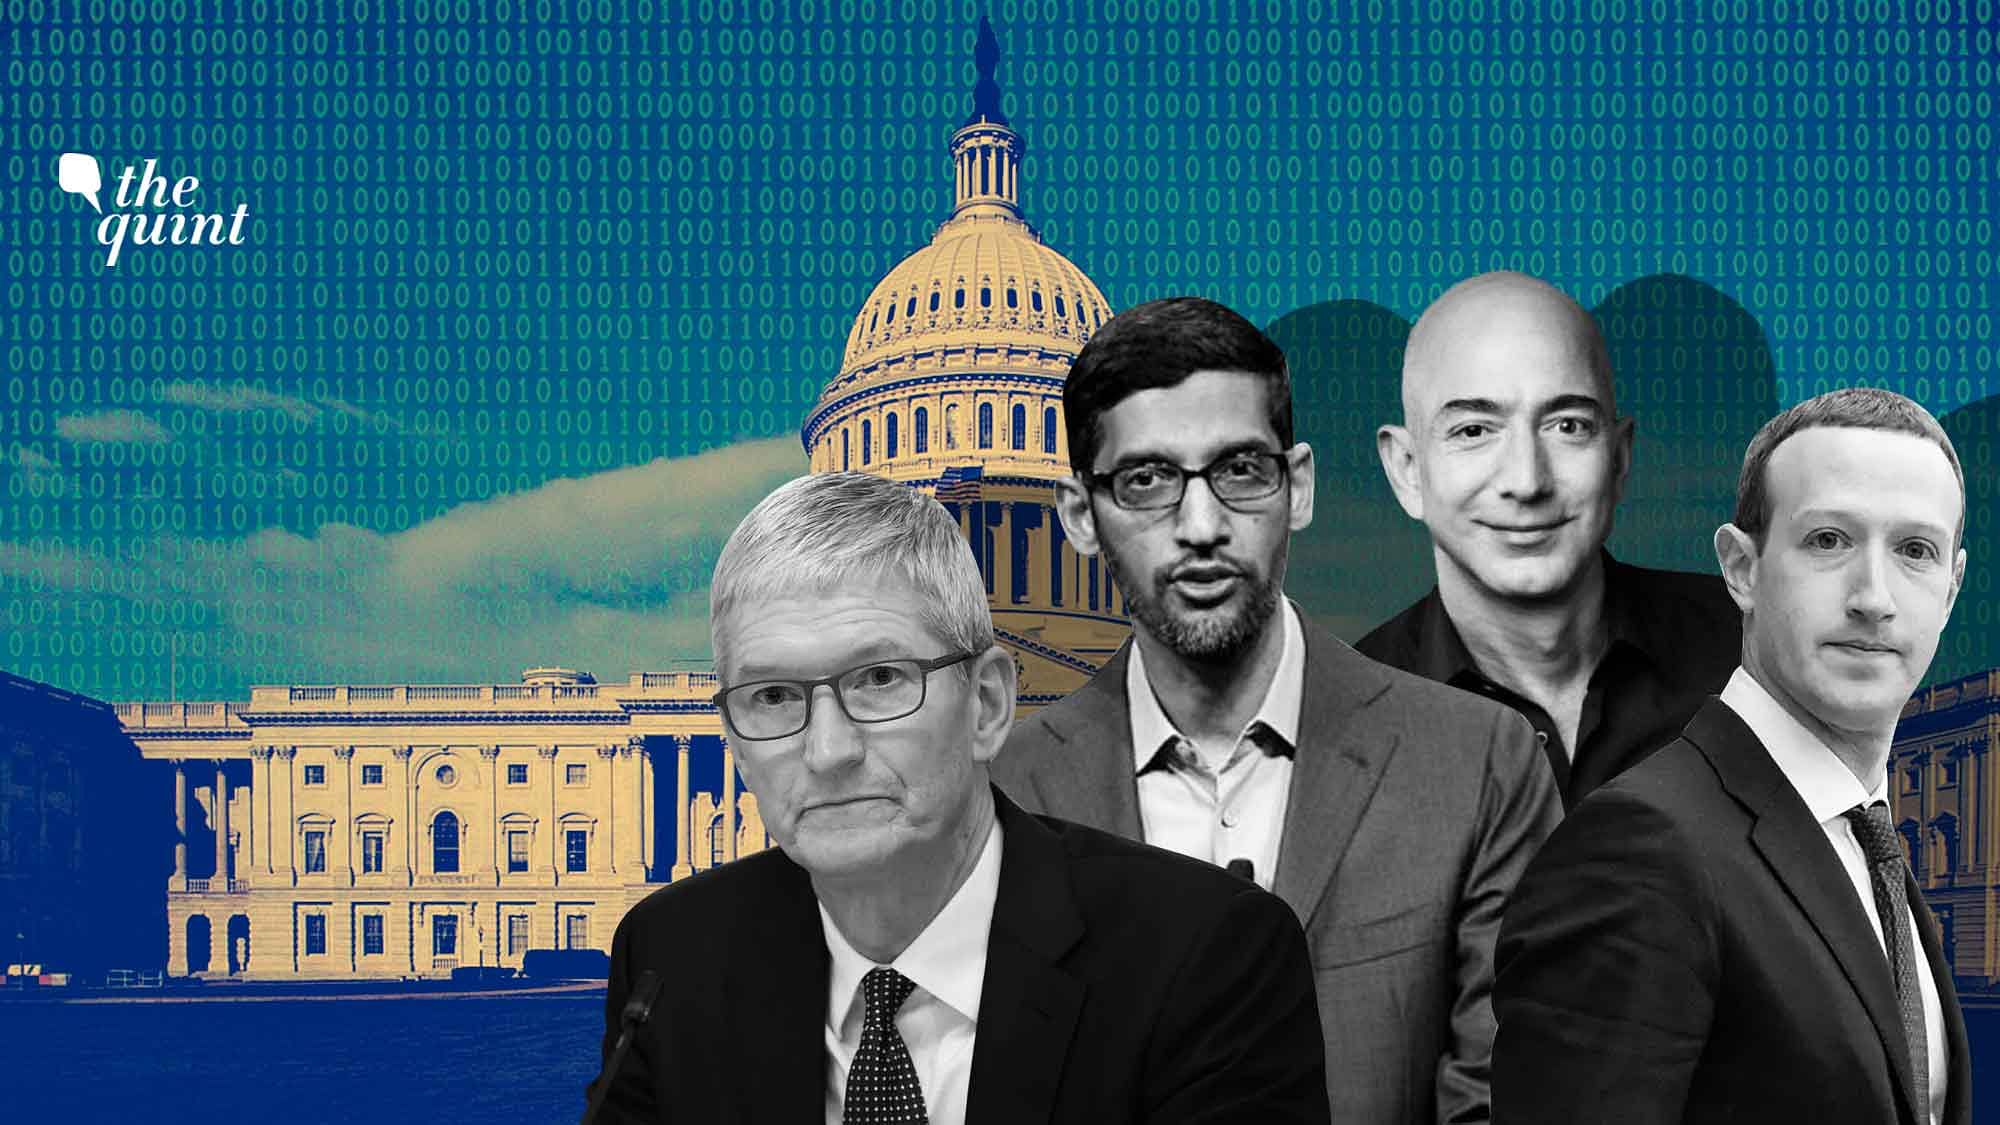 The House Judiciary Committee of US Congress will be questioning Amazon’s Jeff Bezos, Apple’s Tim Cook, Facebook’s Mark Zuckerberg and Google’s Sundar Pichai via video conferencing.